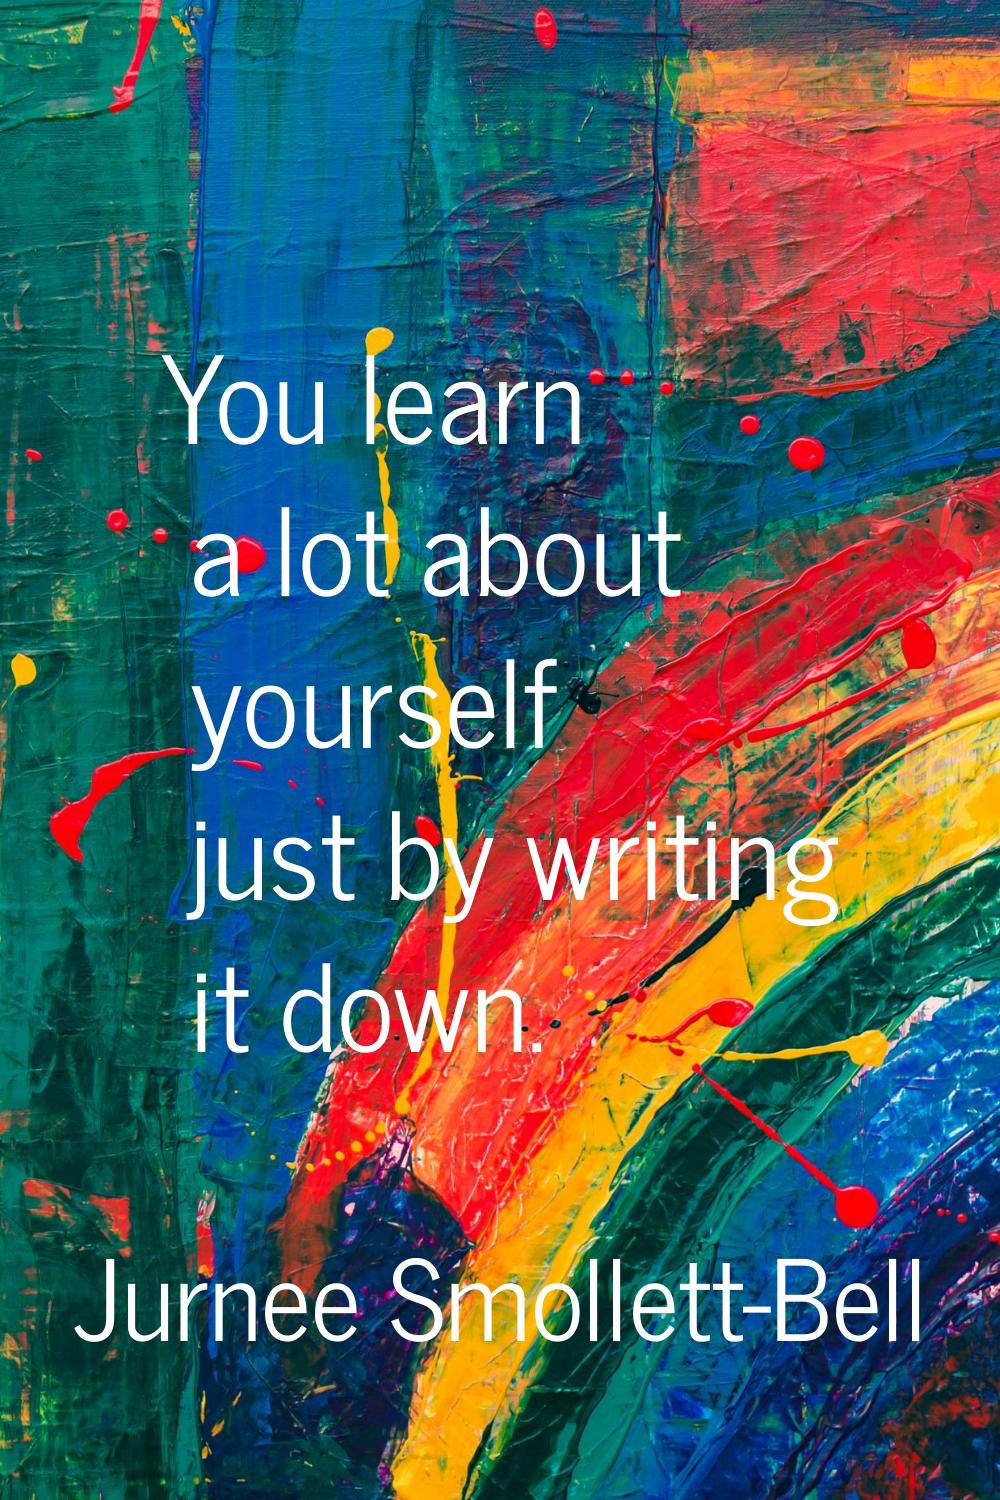 You learn a lot about yourself just by writing it down.